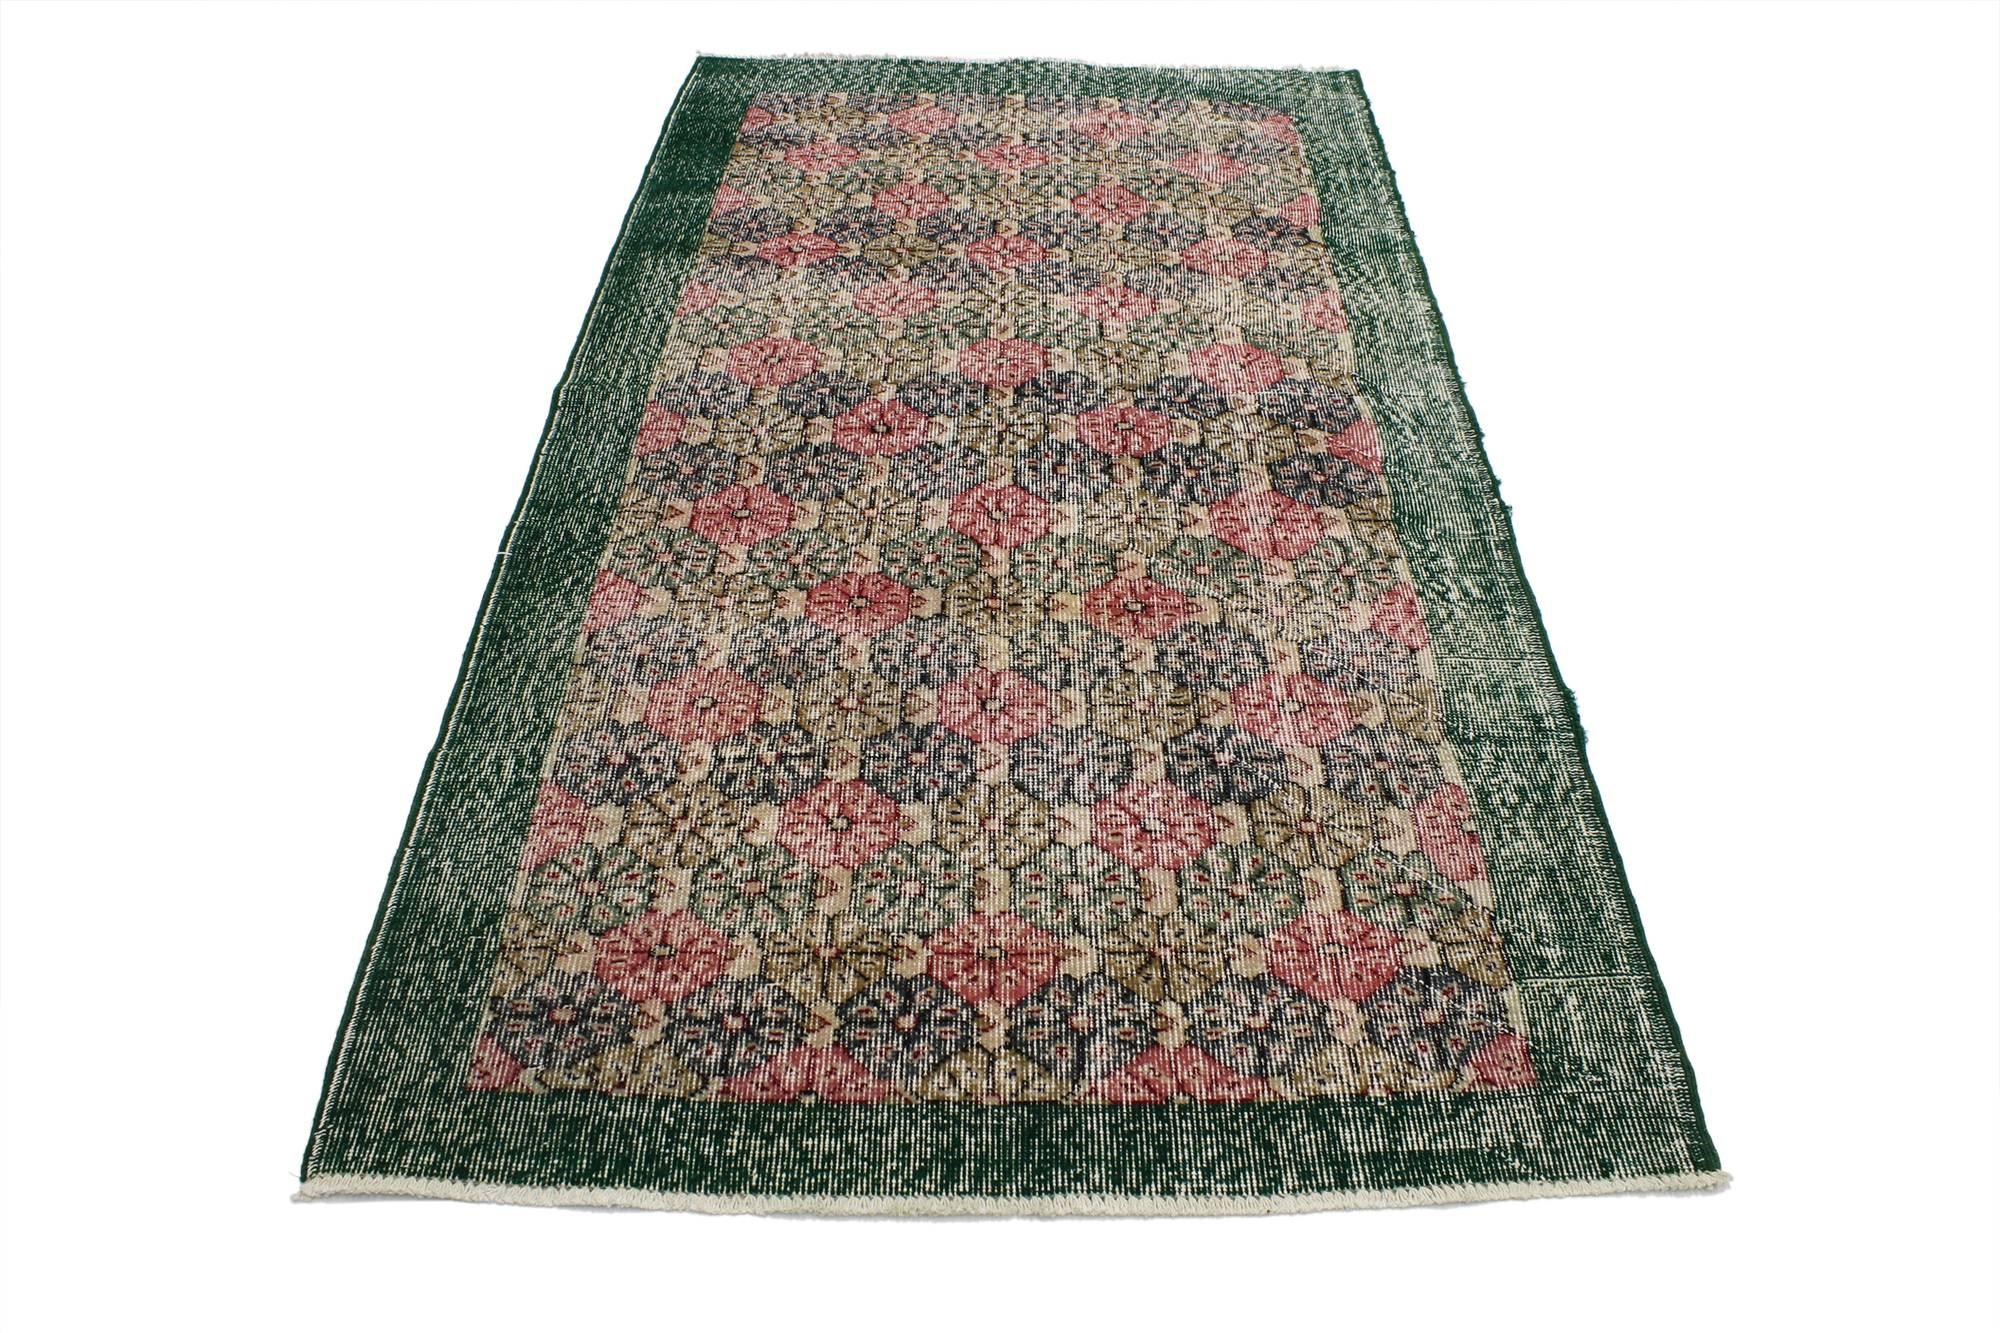 51952, distressed Sivas Accent rug with Industrial Art Deco style. This distressed vintage Turkish Sivas rug with modern Industrial Art Deco style can make an interior space feel both comfortable and modern yet, full of character. Highlighting the